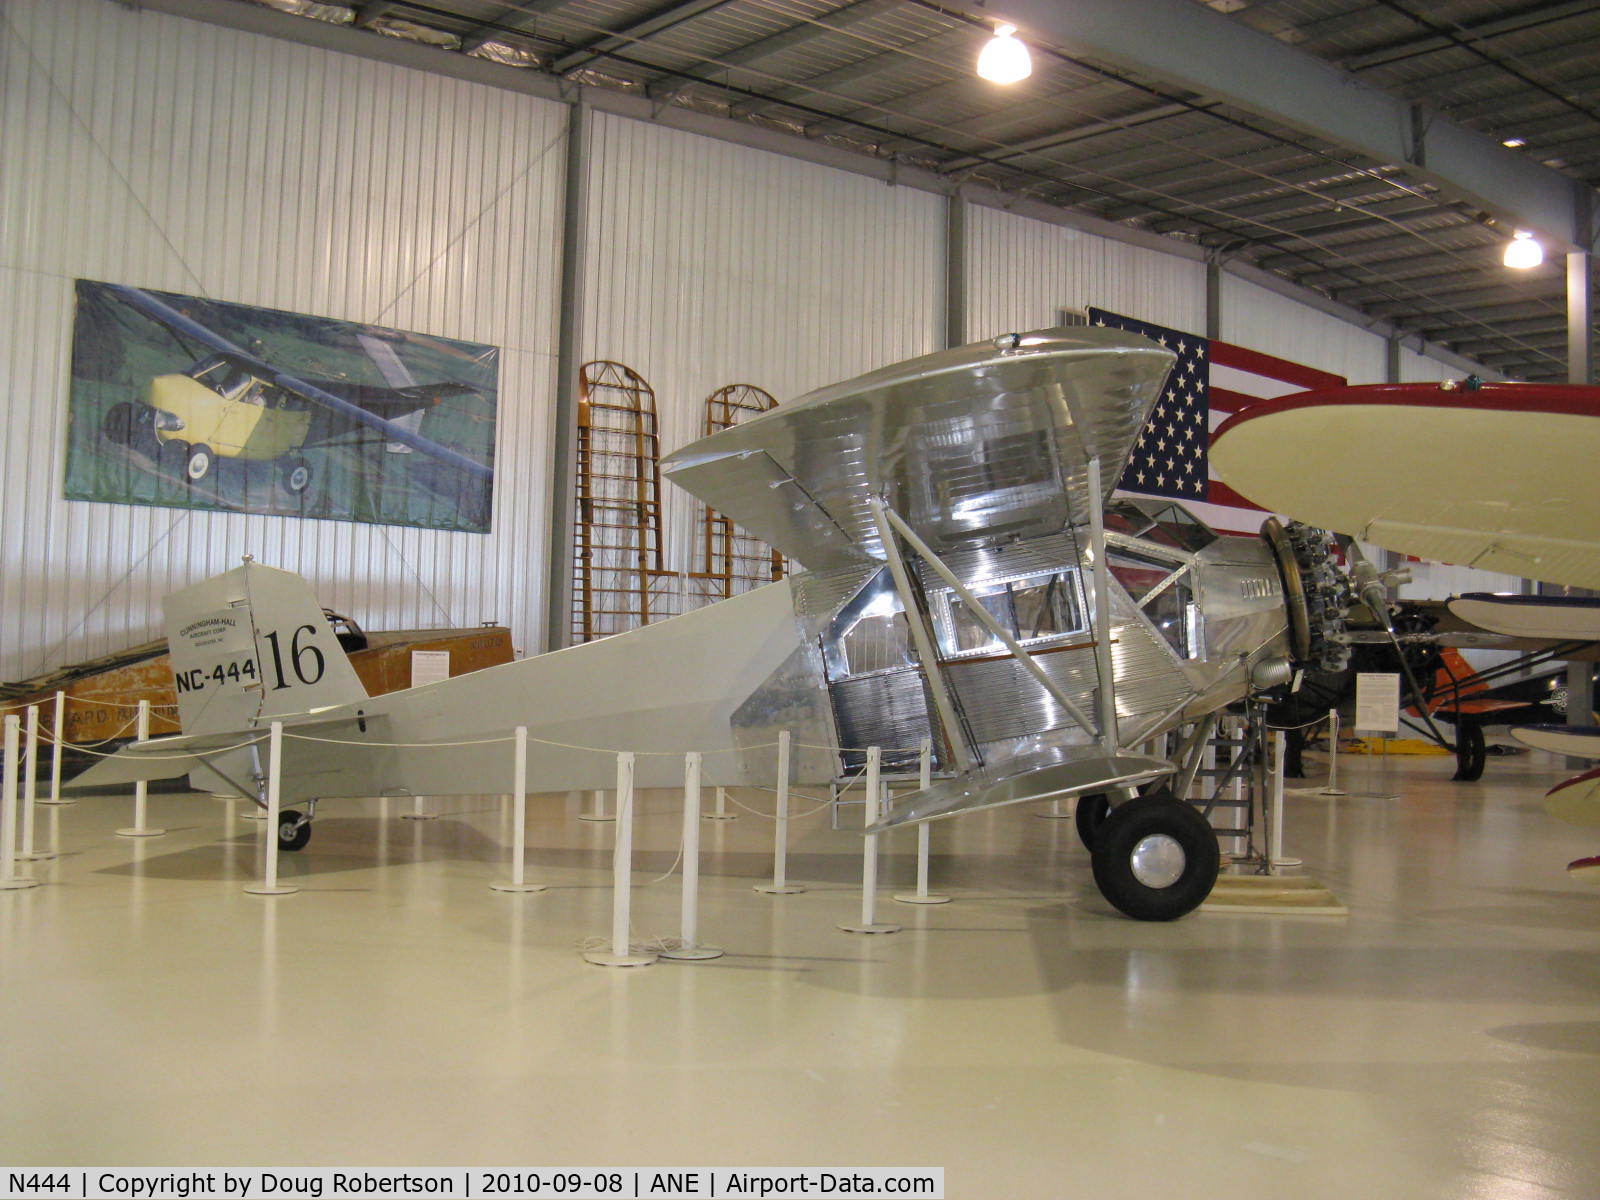 N444, 1938 Cunningham-Hall PT-6F C/N 381, 1938 Cunningham Hall PT-6F Freighter (only PT-6F ever built) conv. to PT-6 pax, P&W R-985 450 Hp conv. from original Wright 330 Hp radial, original price $13,900, in 1929 only one PT-6 was built/sold. At Golden Wings Museum.